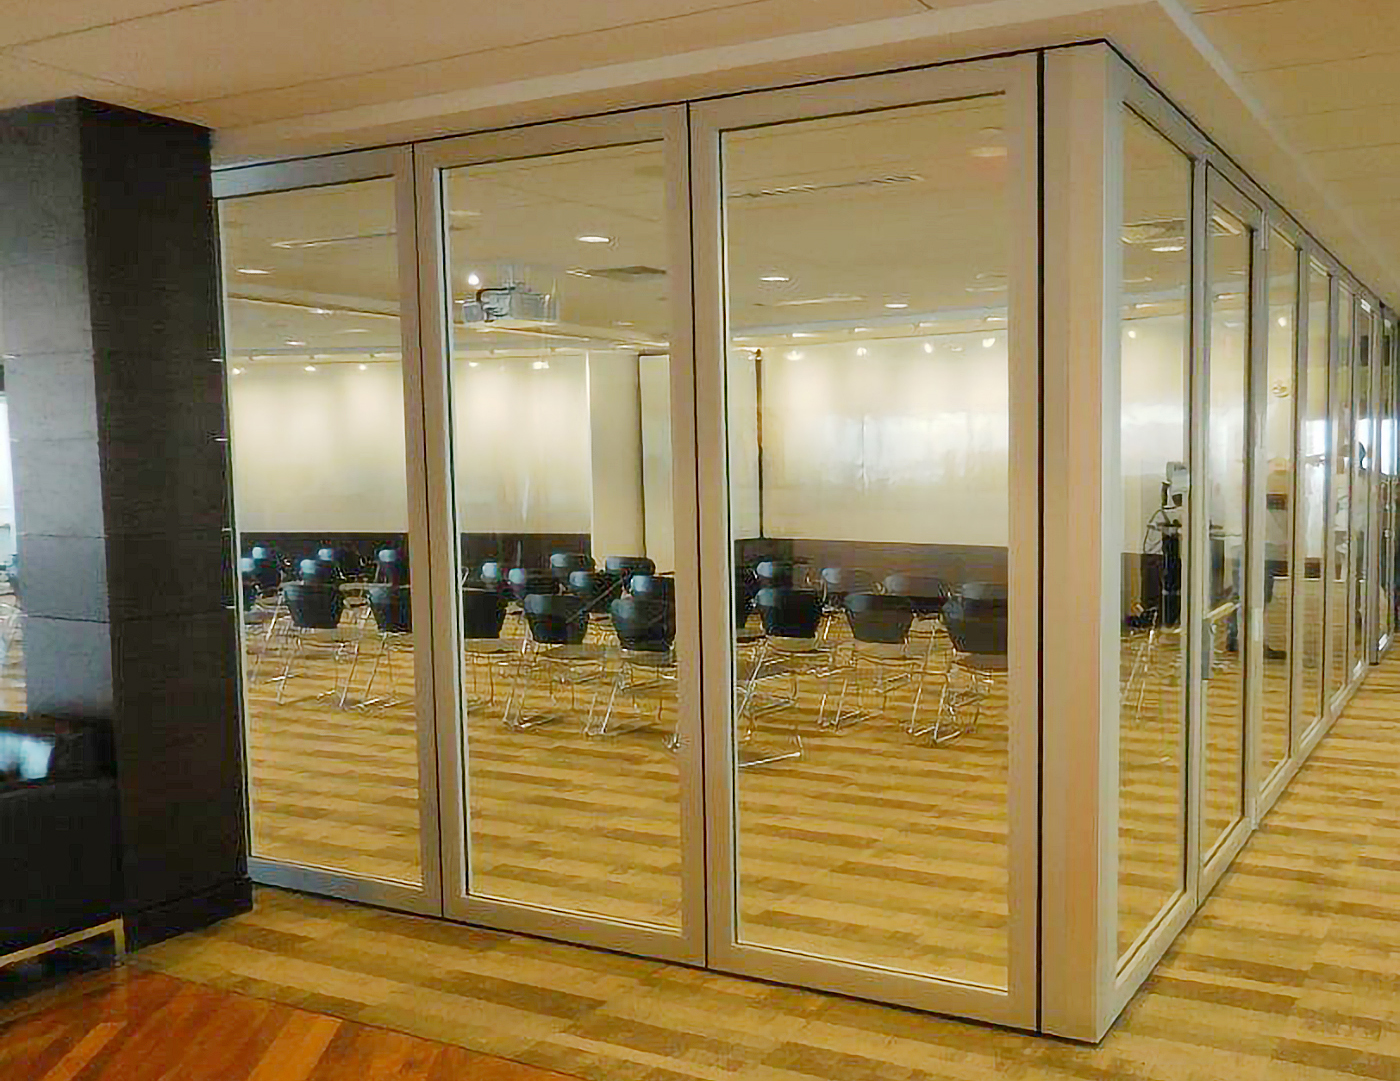 This project features multiple folding glass wall systems with all wall configurations.